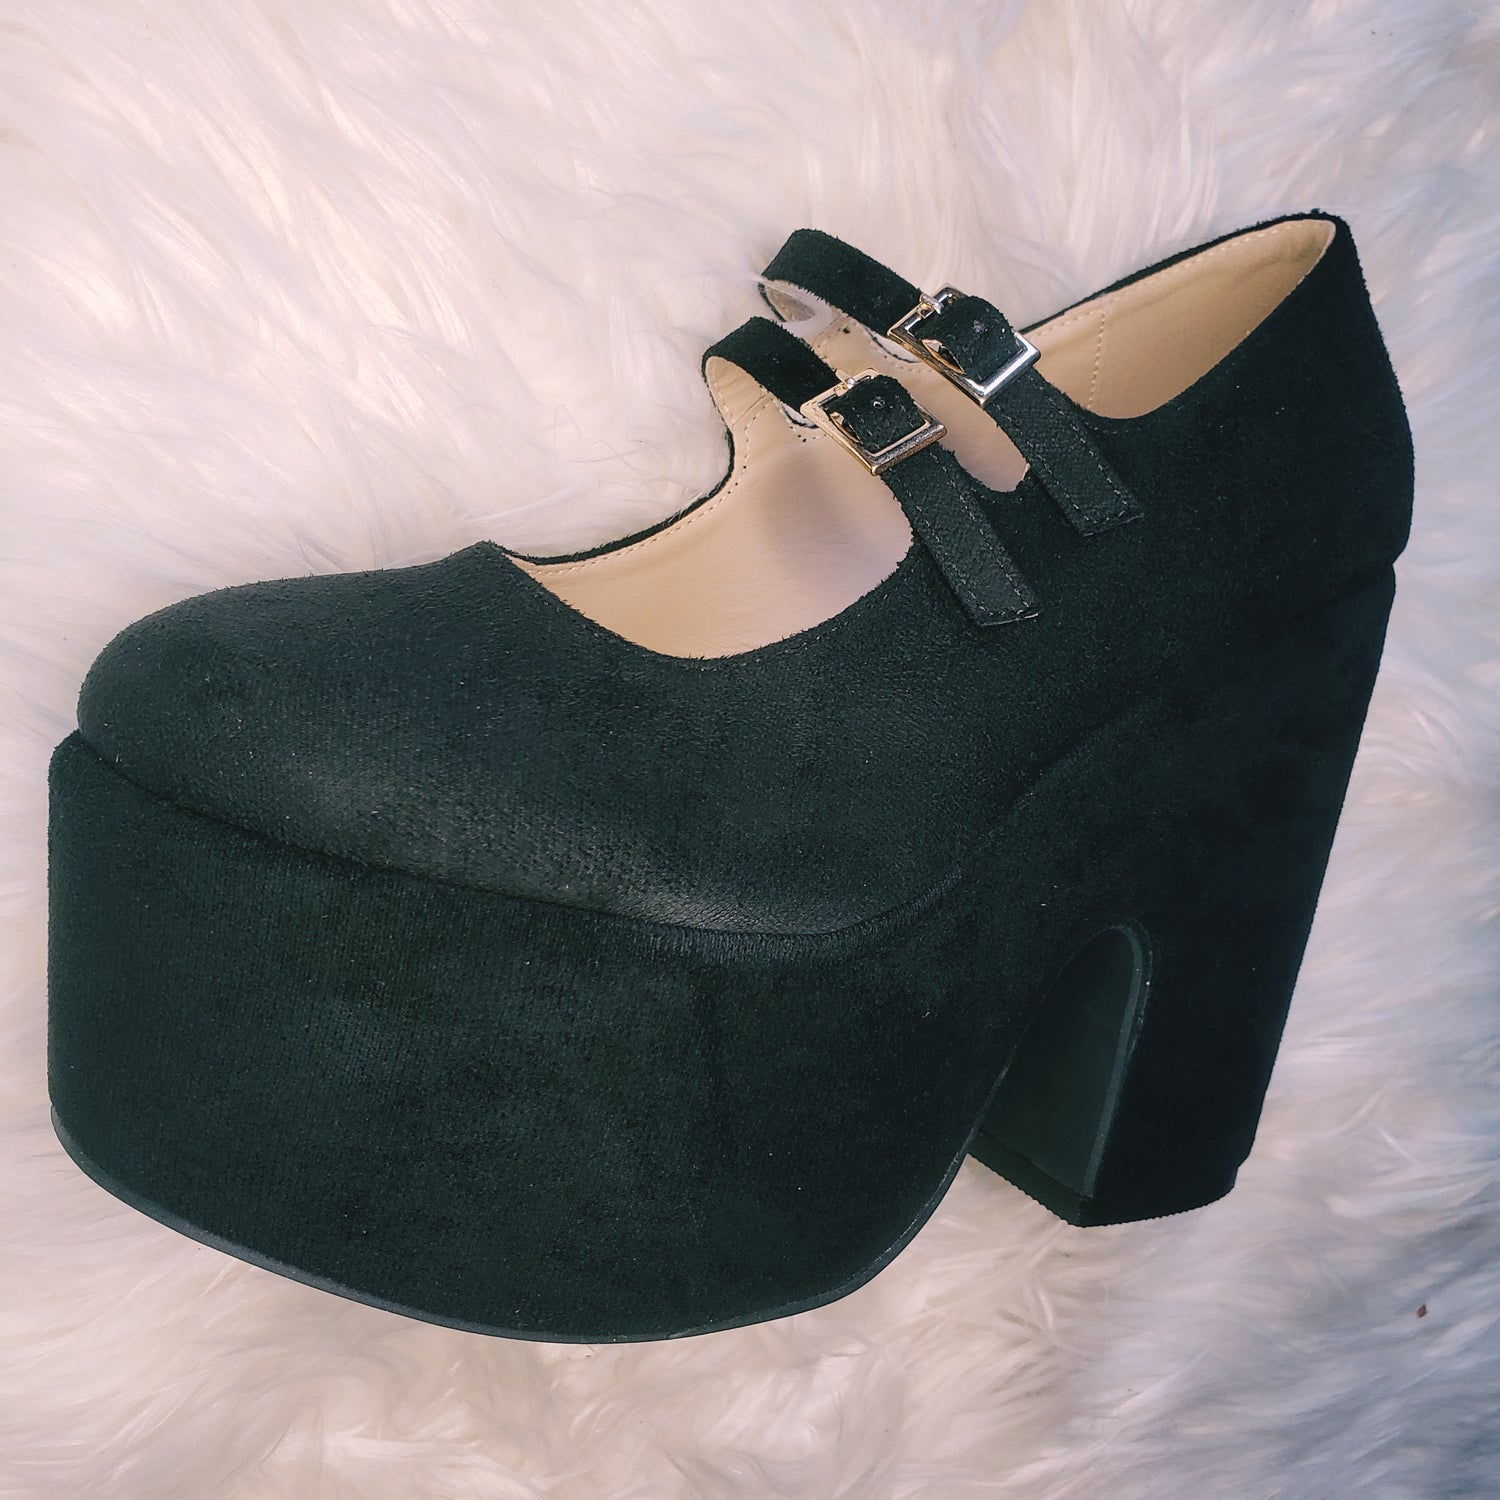 Court Party Shoes High Heel Ladies Womens Mary Jane Platform Suede Buckle  Size | eBay